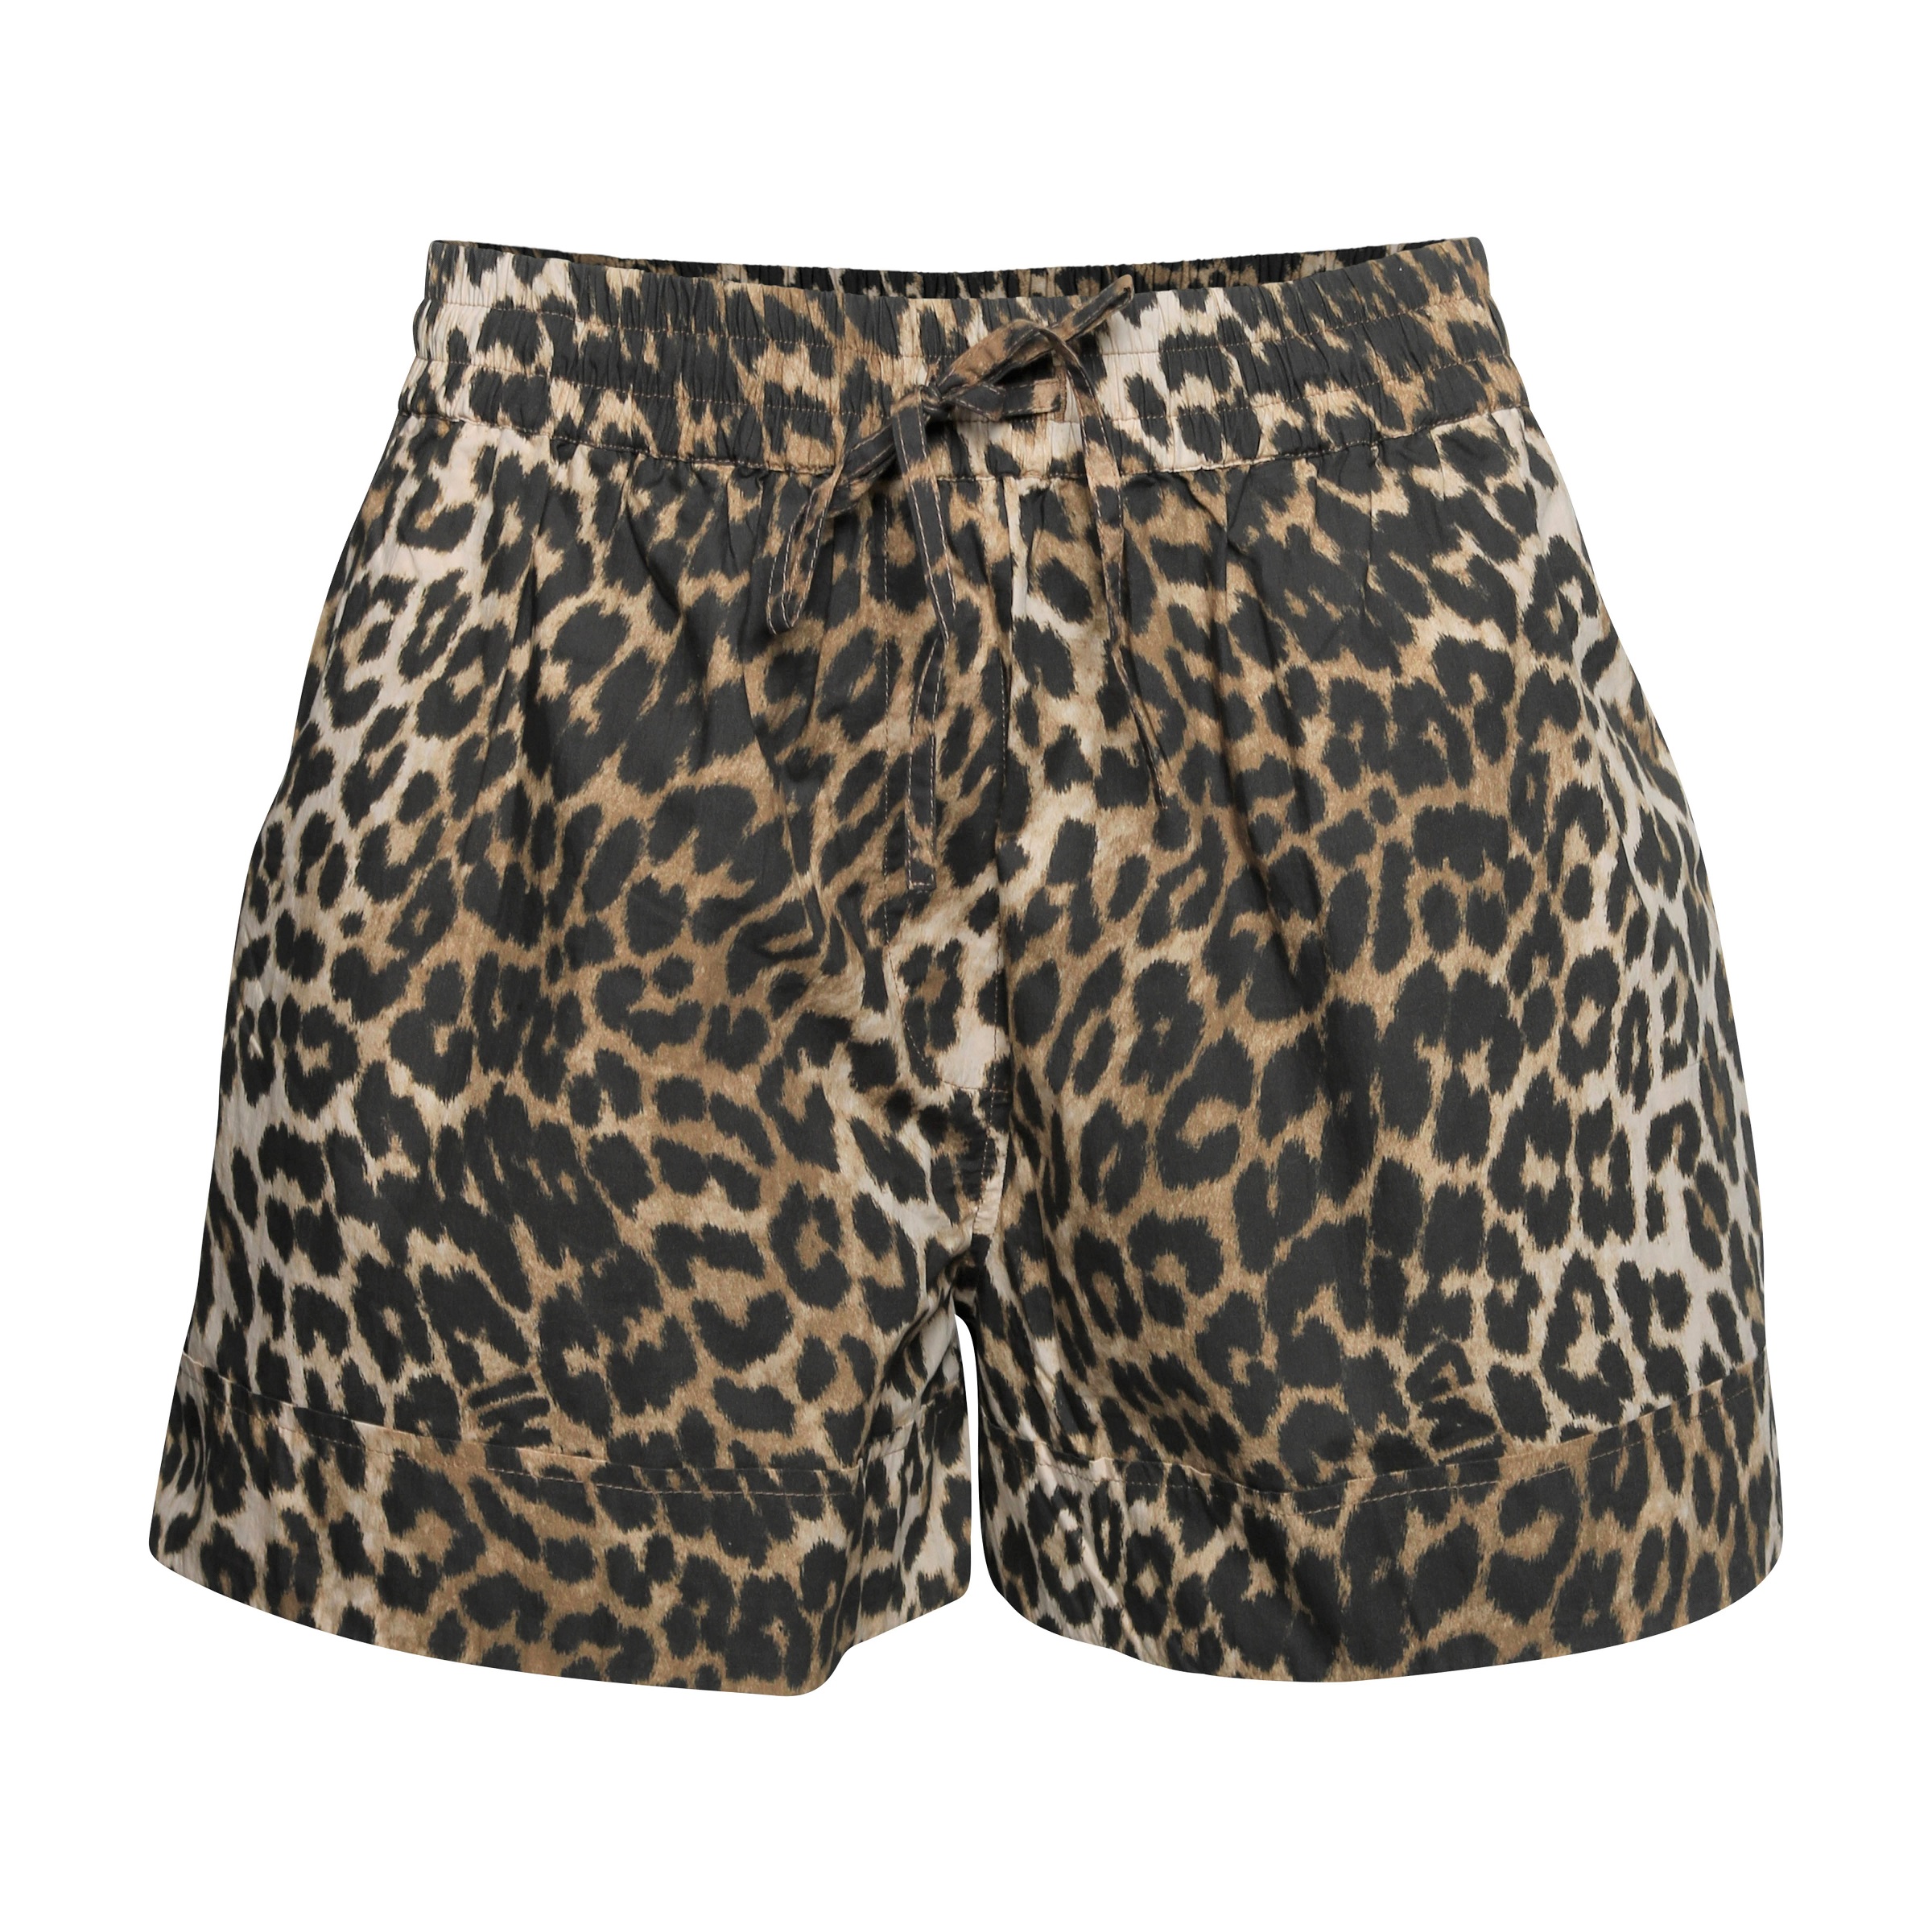 GANNI Printed Cotton Elasticated Shorts in Leopard 34